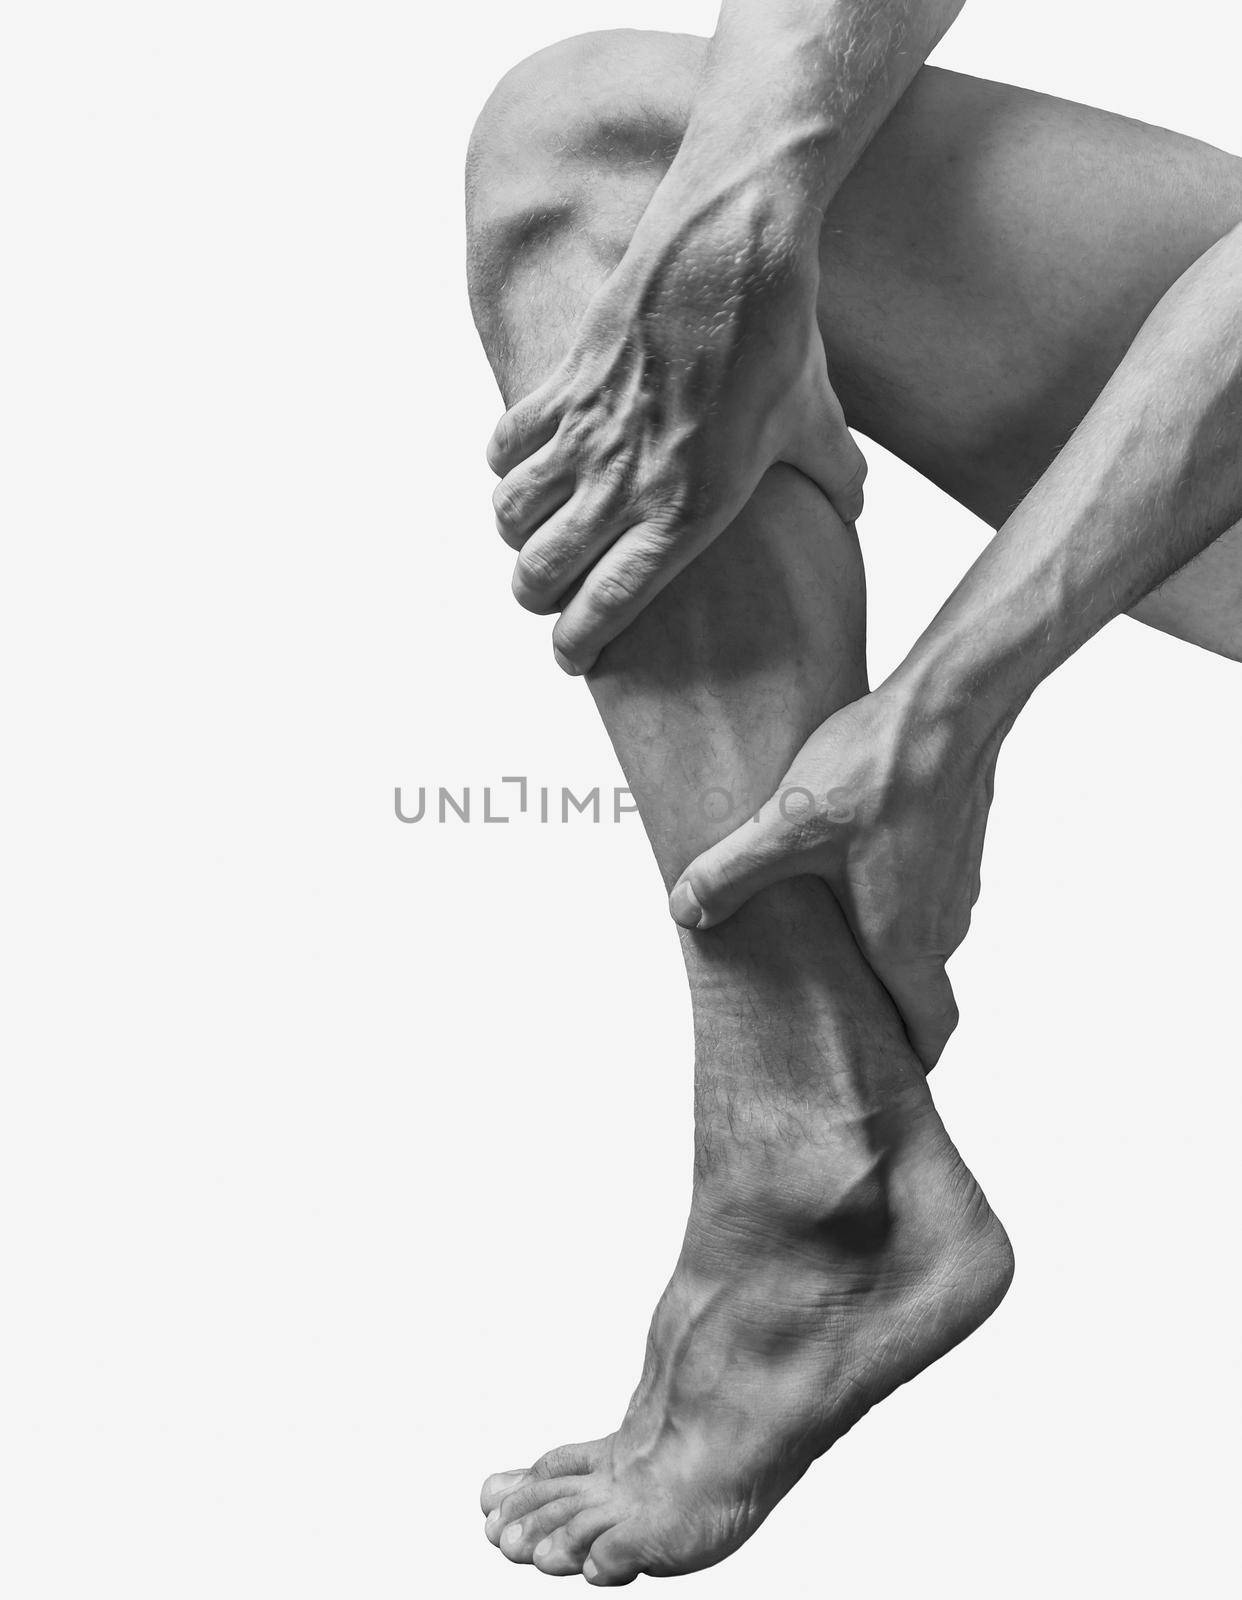 Acute pain in the male calf muscle. Monochrome image, isolated on a white background